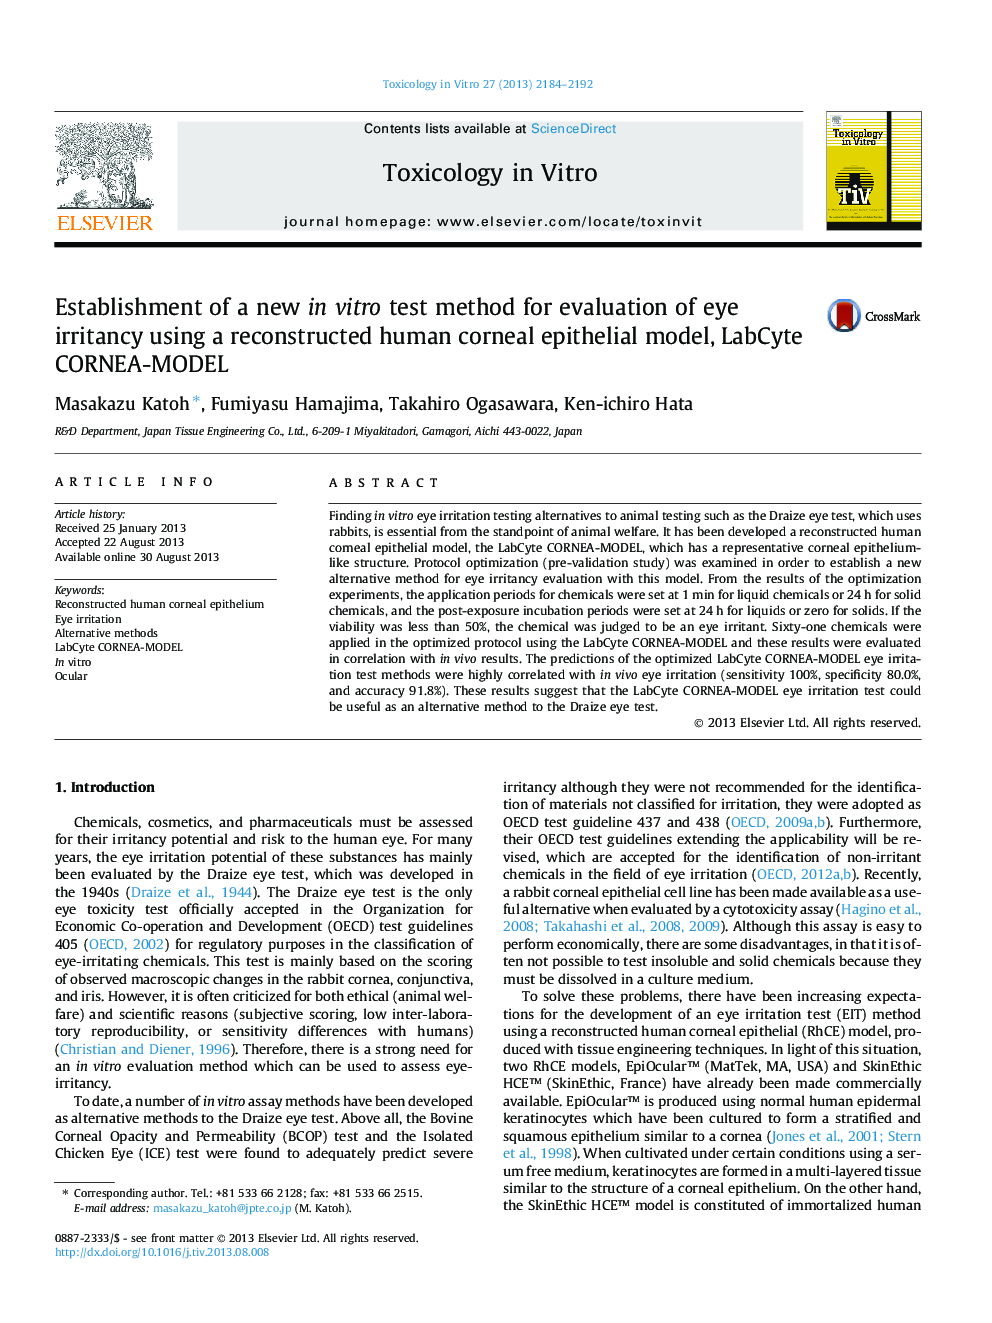 Establishment of a new in vitro test method for evaluation of eye irritancy using a reconstructed human corneal epithelial model, LabCyte CORNEA-MODEL